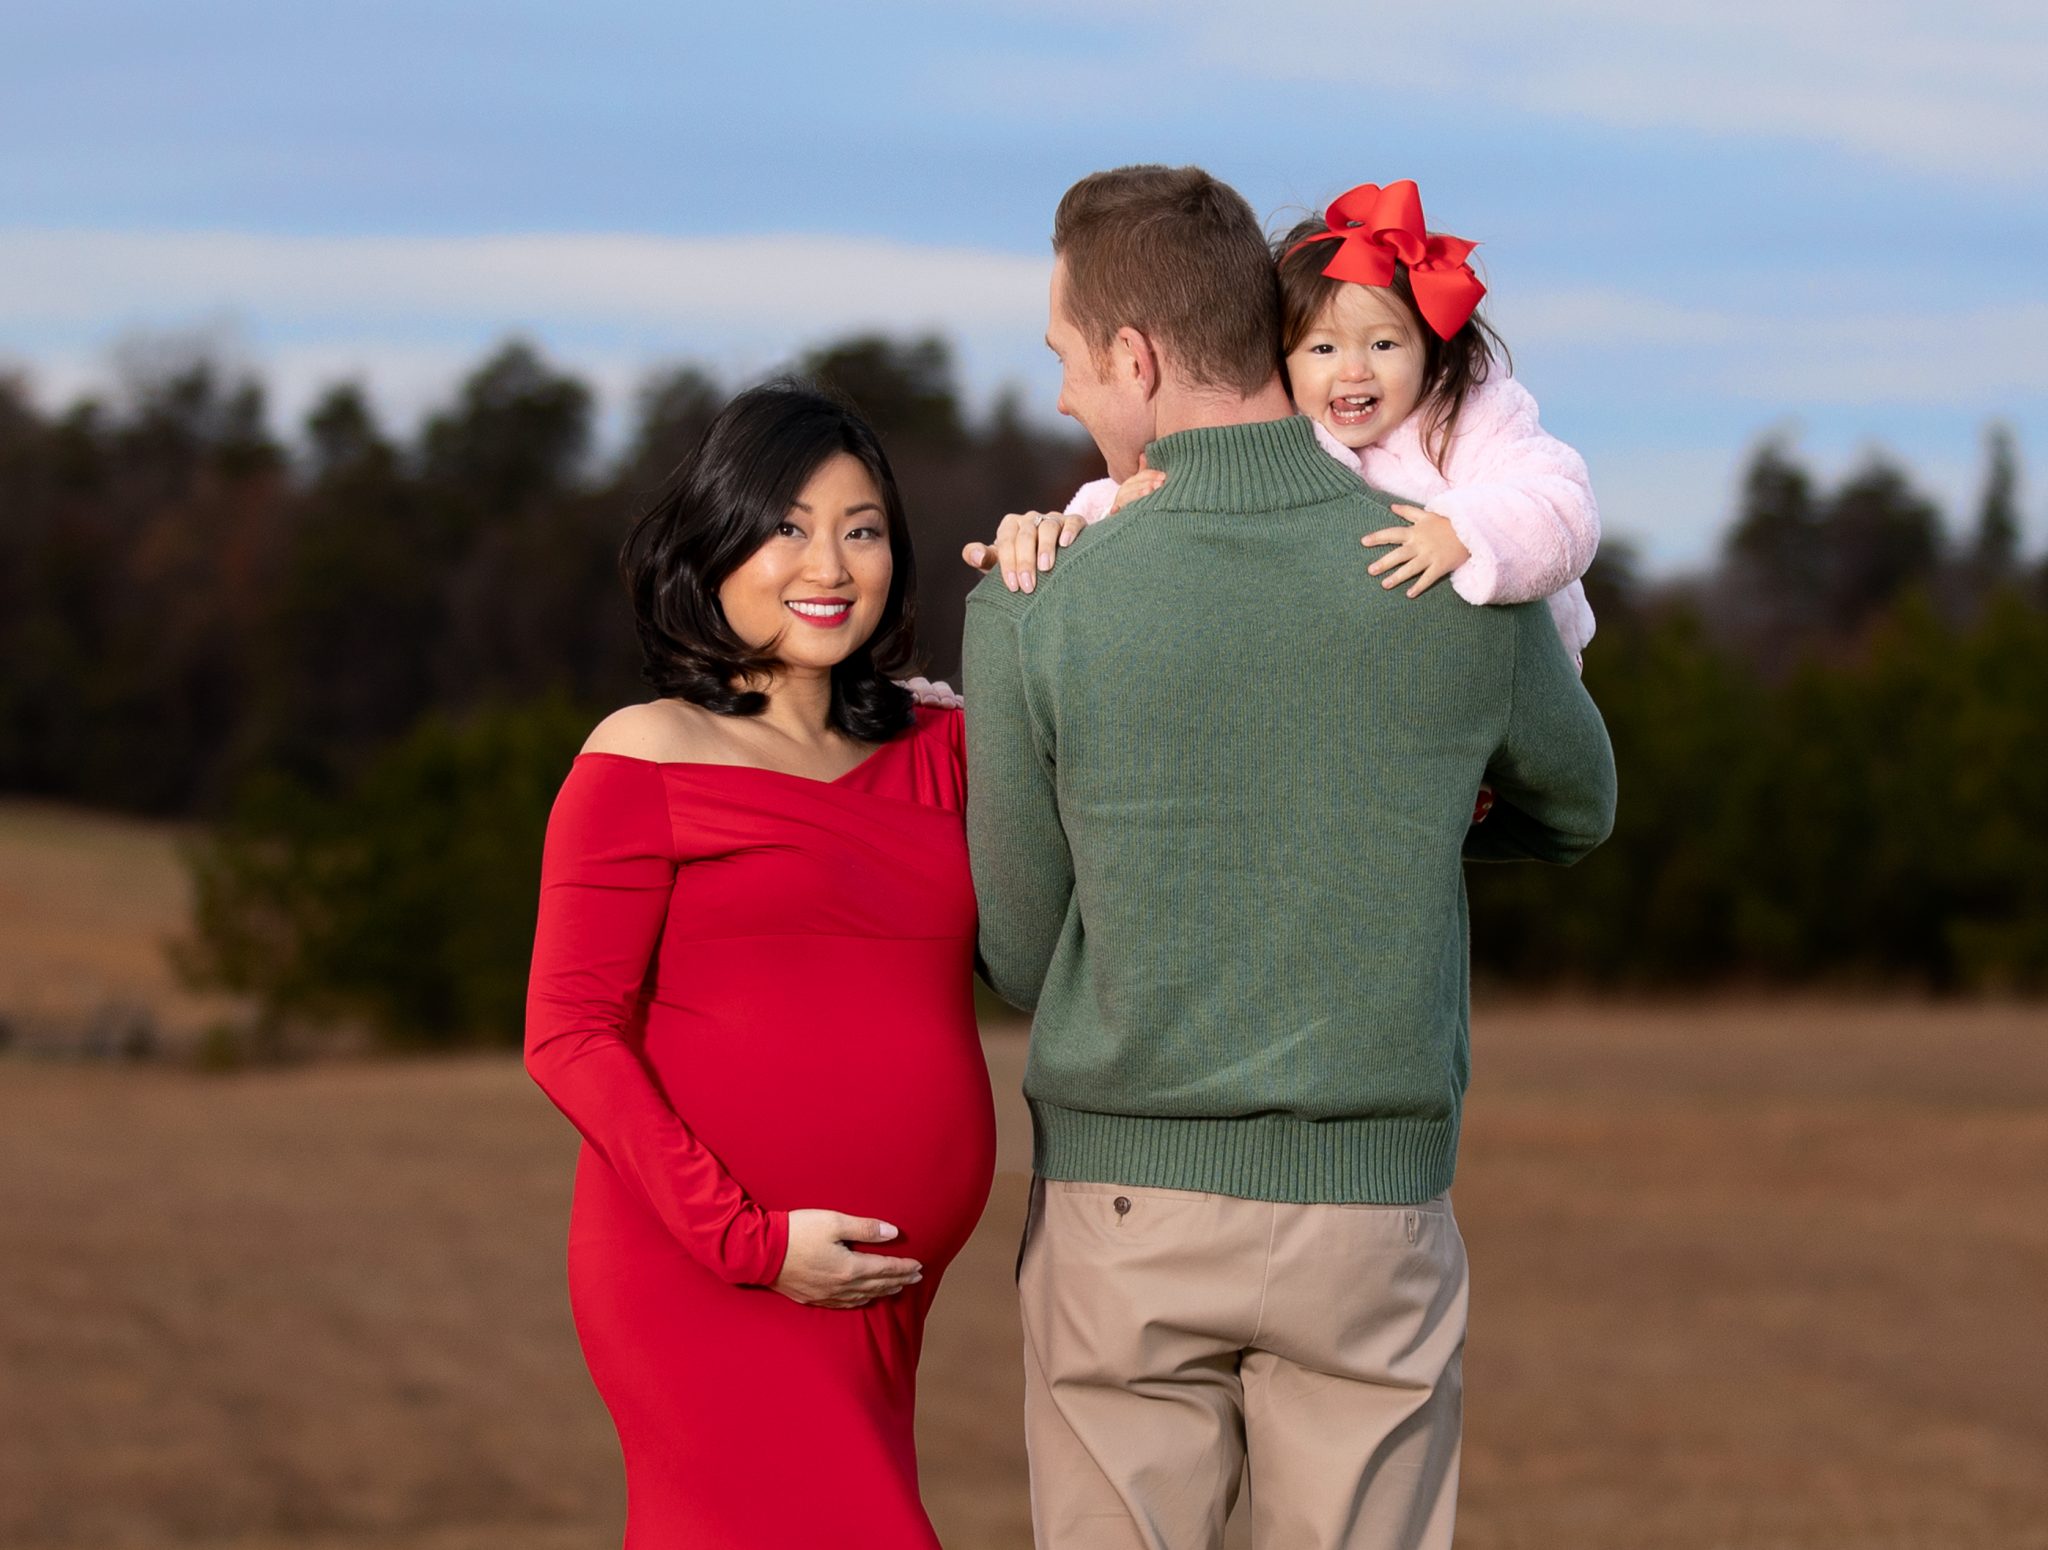 Newborn photographer in Laurel, MD and Pregnancy photography in Baltimore, MD.